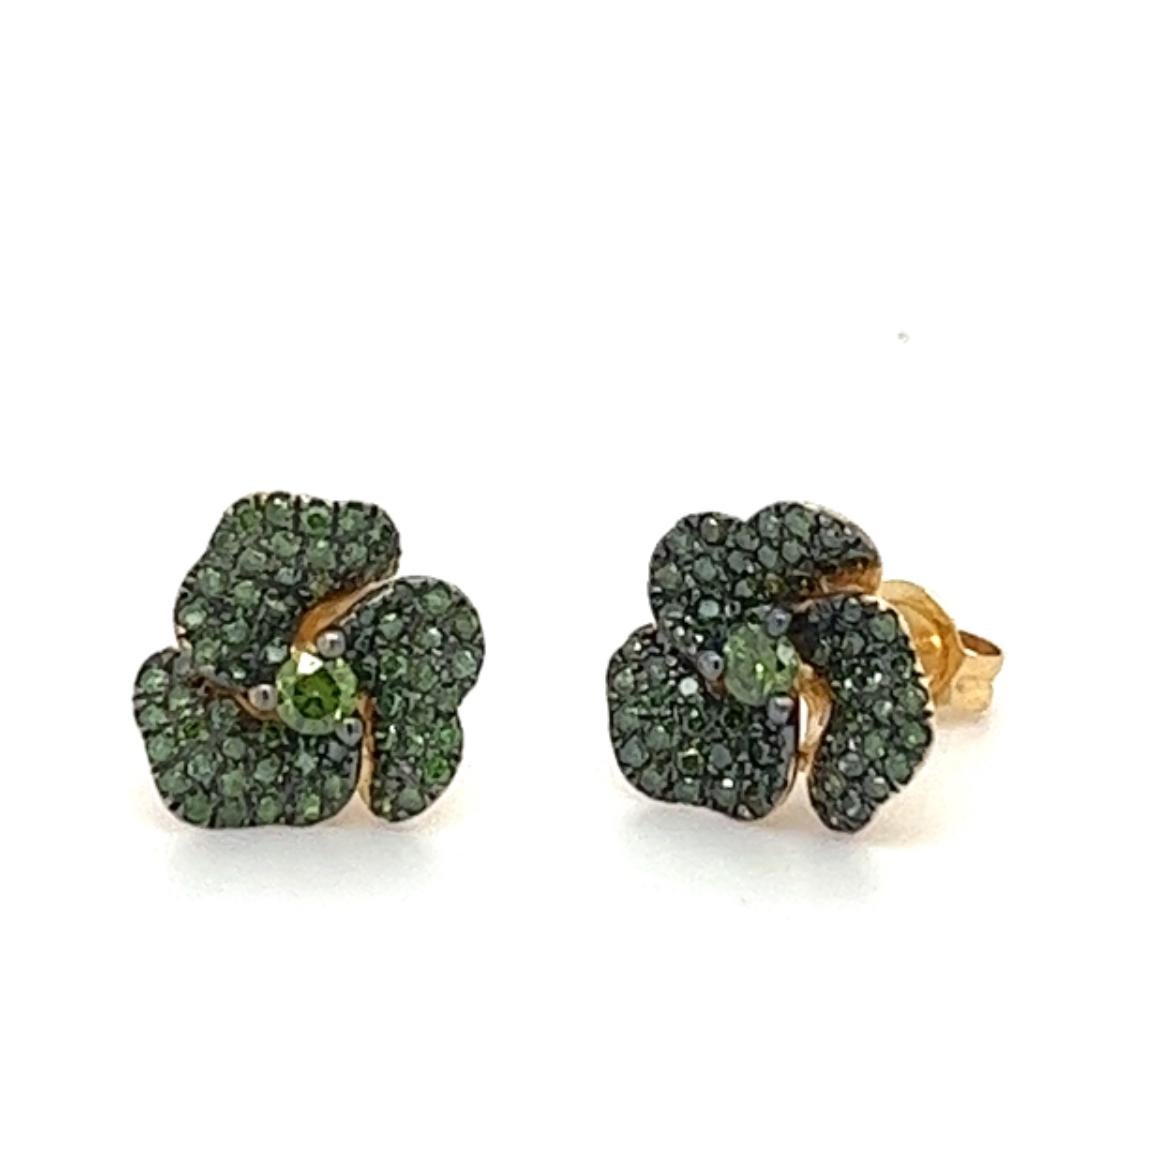 18K Gold Green Diamond Flower Earrings

18K Yellow Gold - 2.76 GM
Green Diamonds: 0.60 CT
Flowers Diameter: 10 mm

The Althoff Jewelry 18K yellow gold earrings with green diamonds combine the rich green hue of the diamonds with the warmth of the